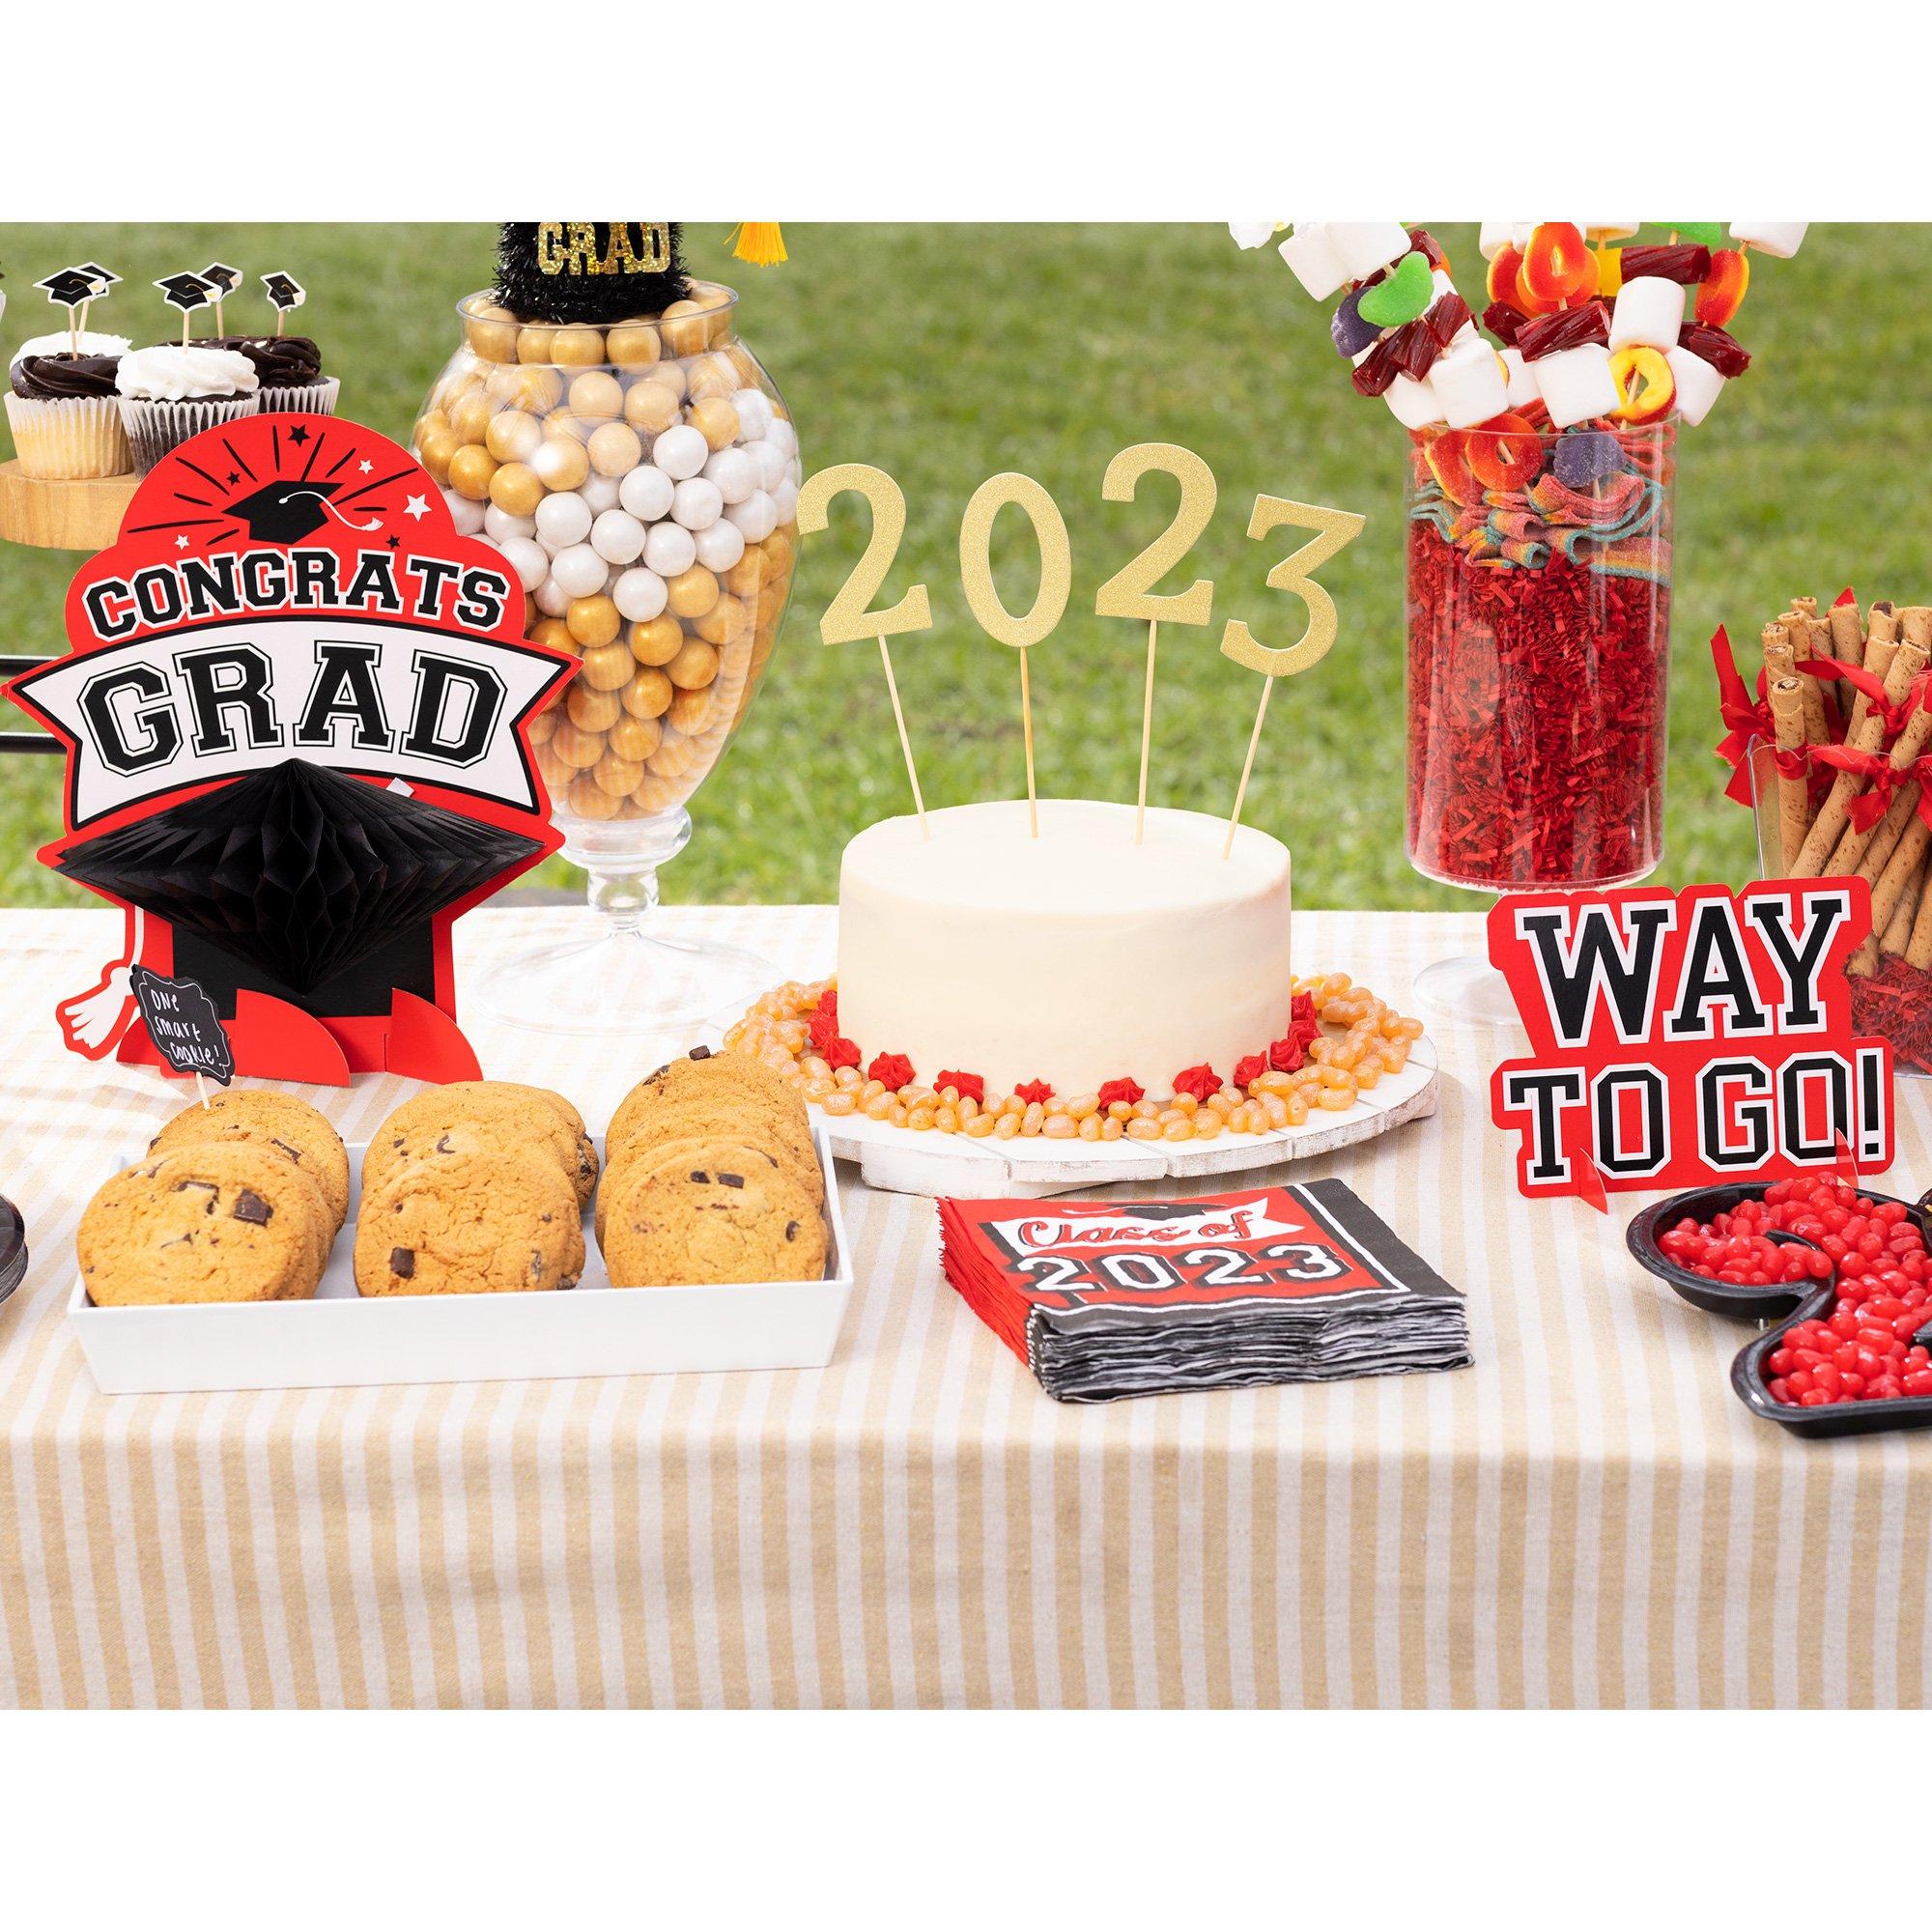 Red Congrats Grad Cardstock & Tissue Paper Table Decorating Kit, 7pc